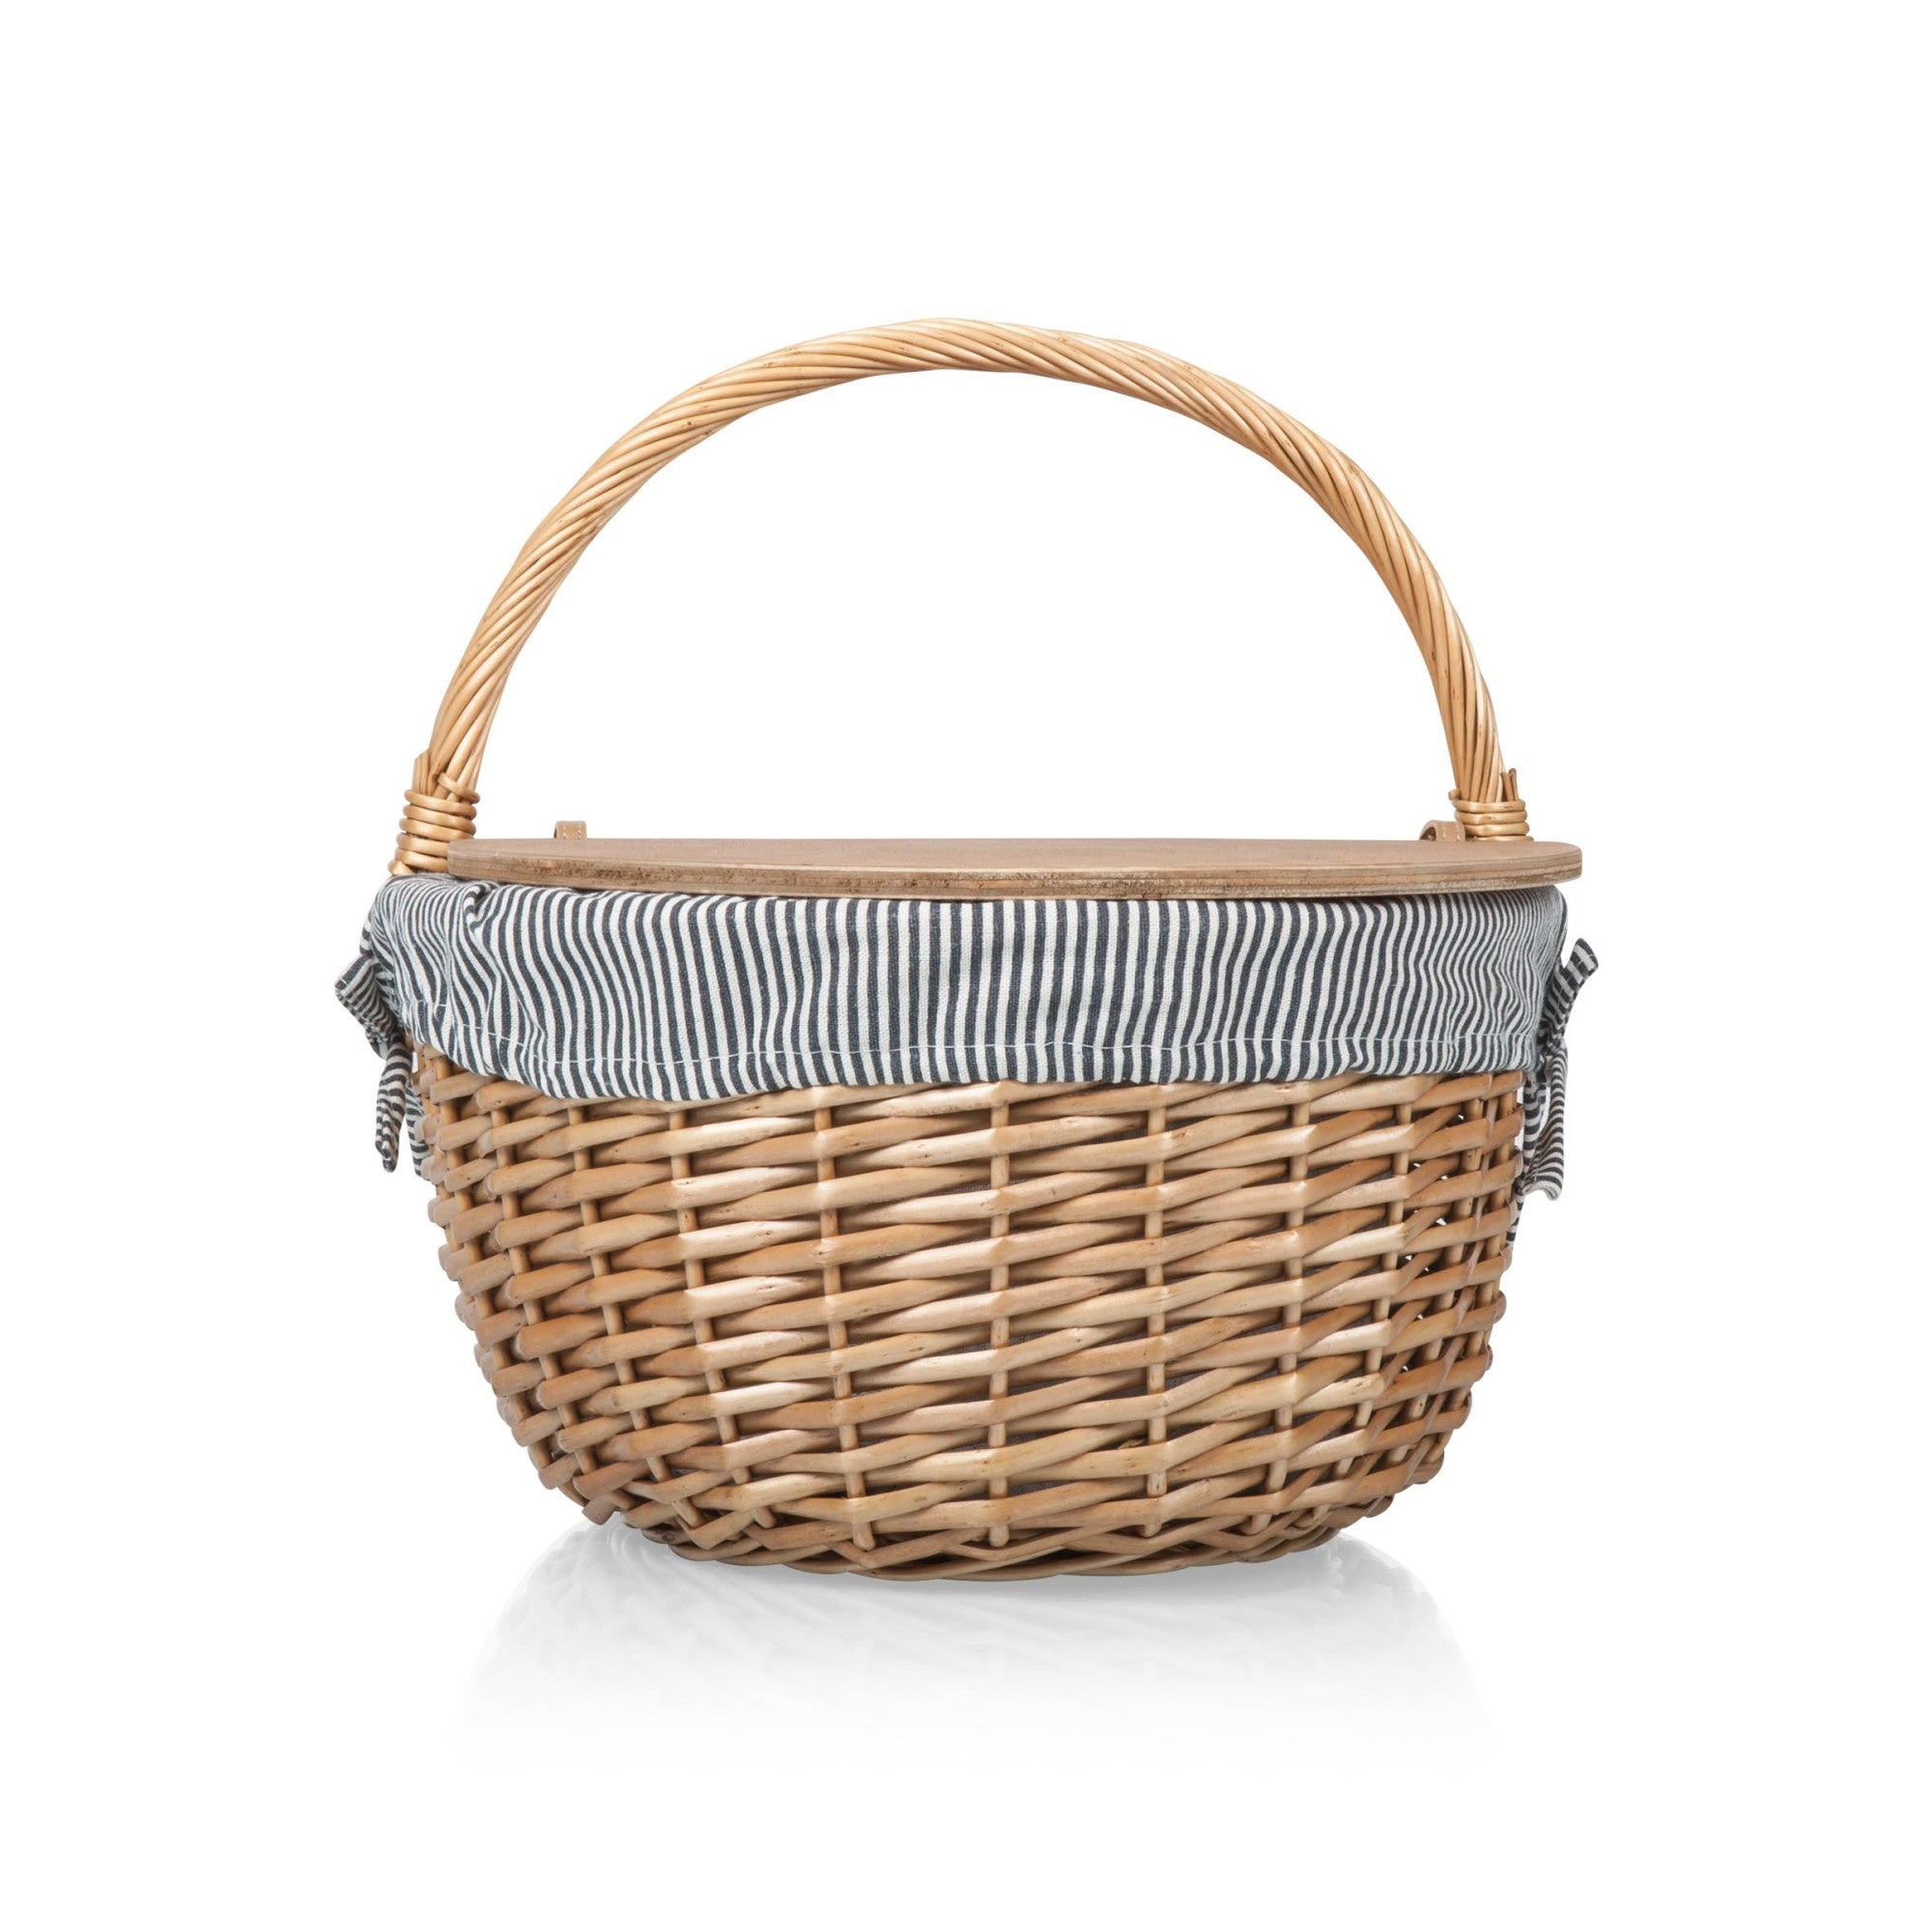 Picnic Time Country Picnic Basket - Red/Black Plaid